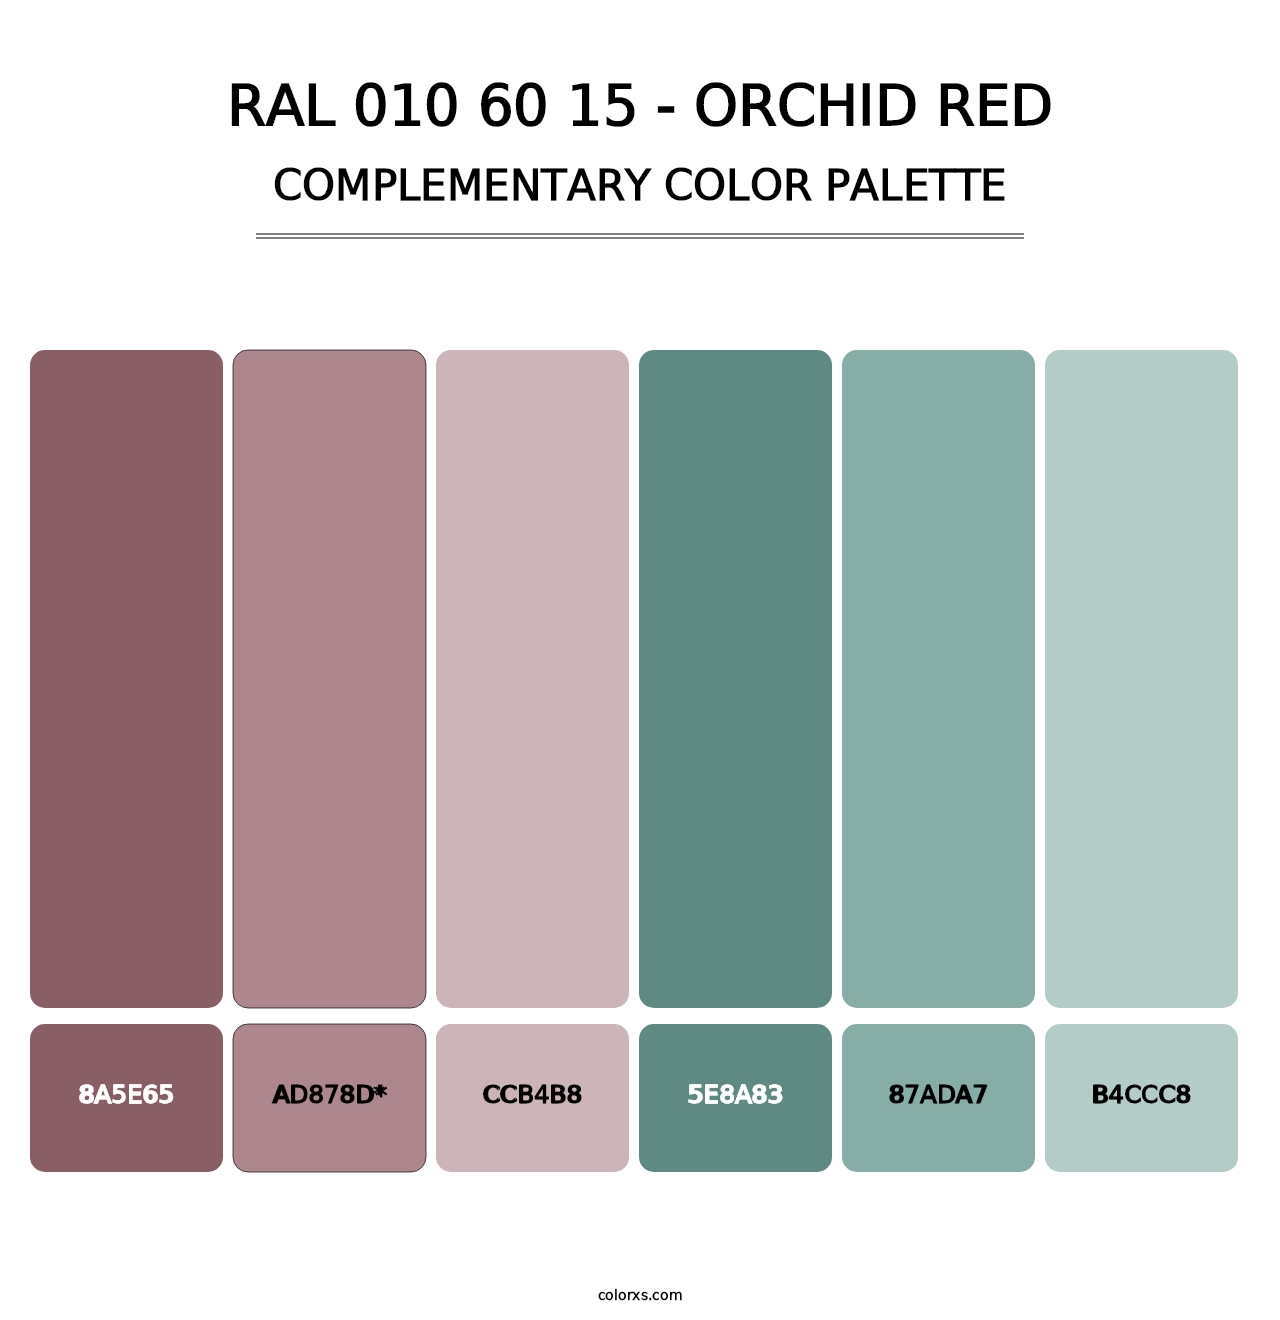 RAL 010 60 15 - Orchid Red - Complementary Color Palette